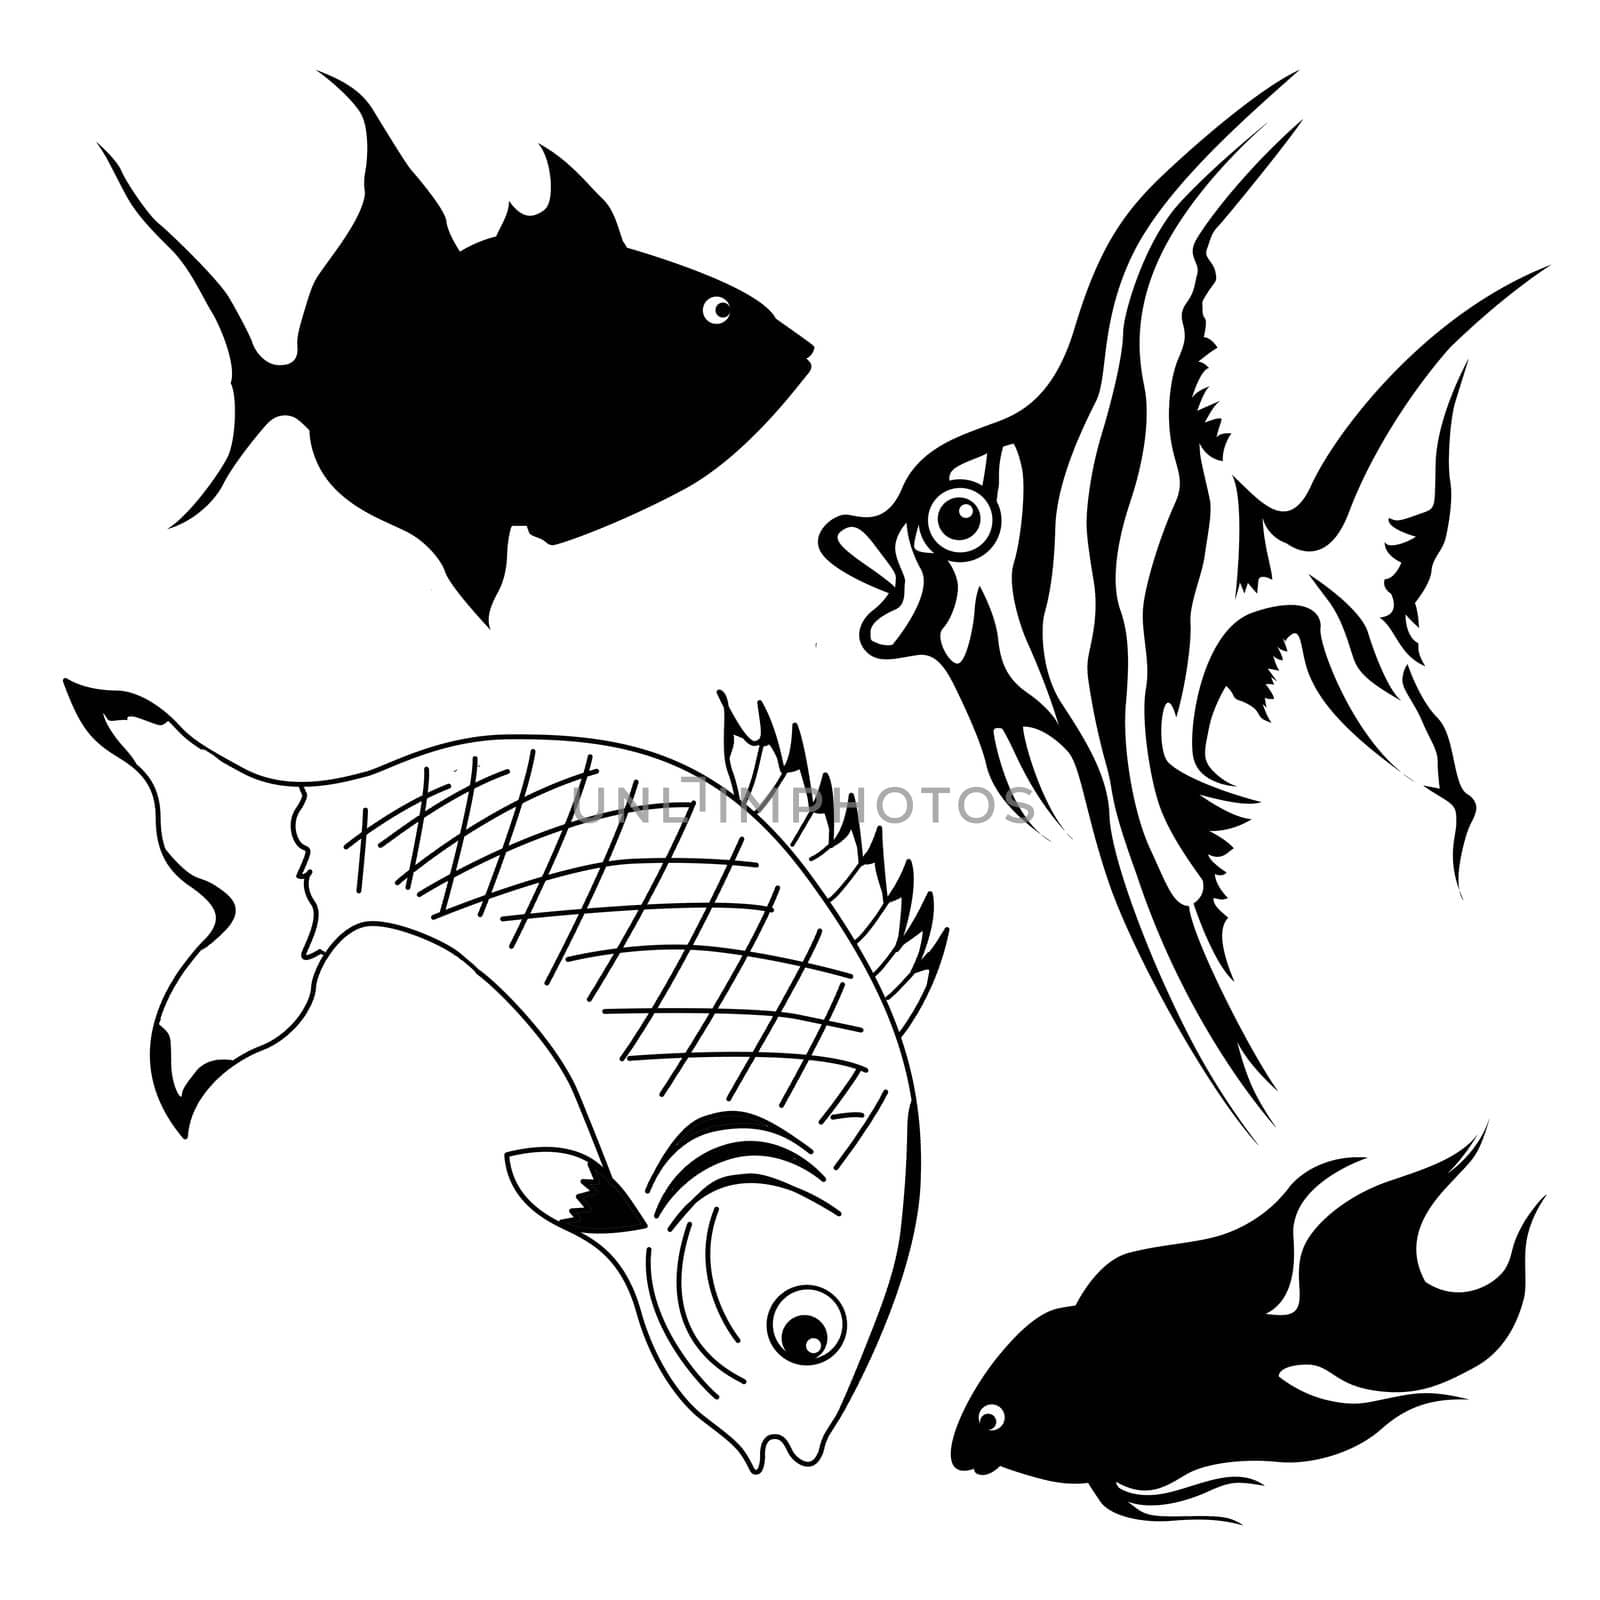 set of fish on white background by basel101658